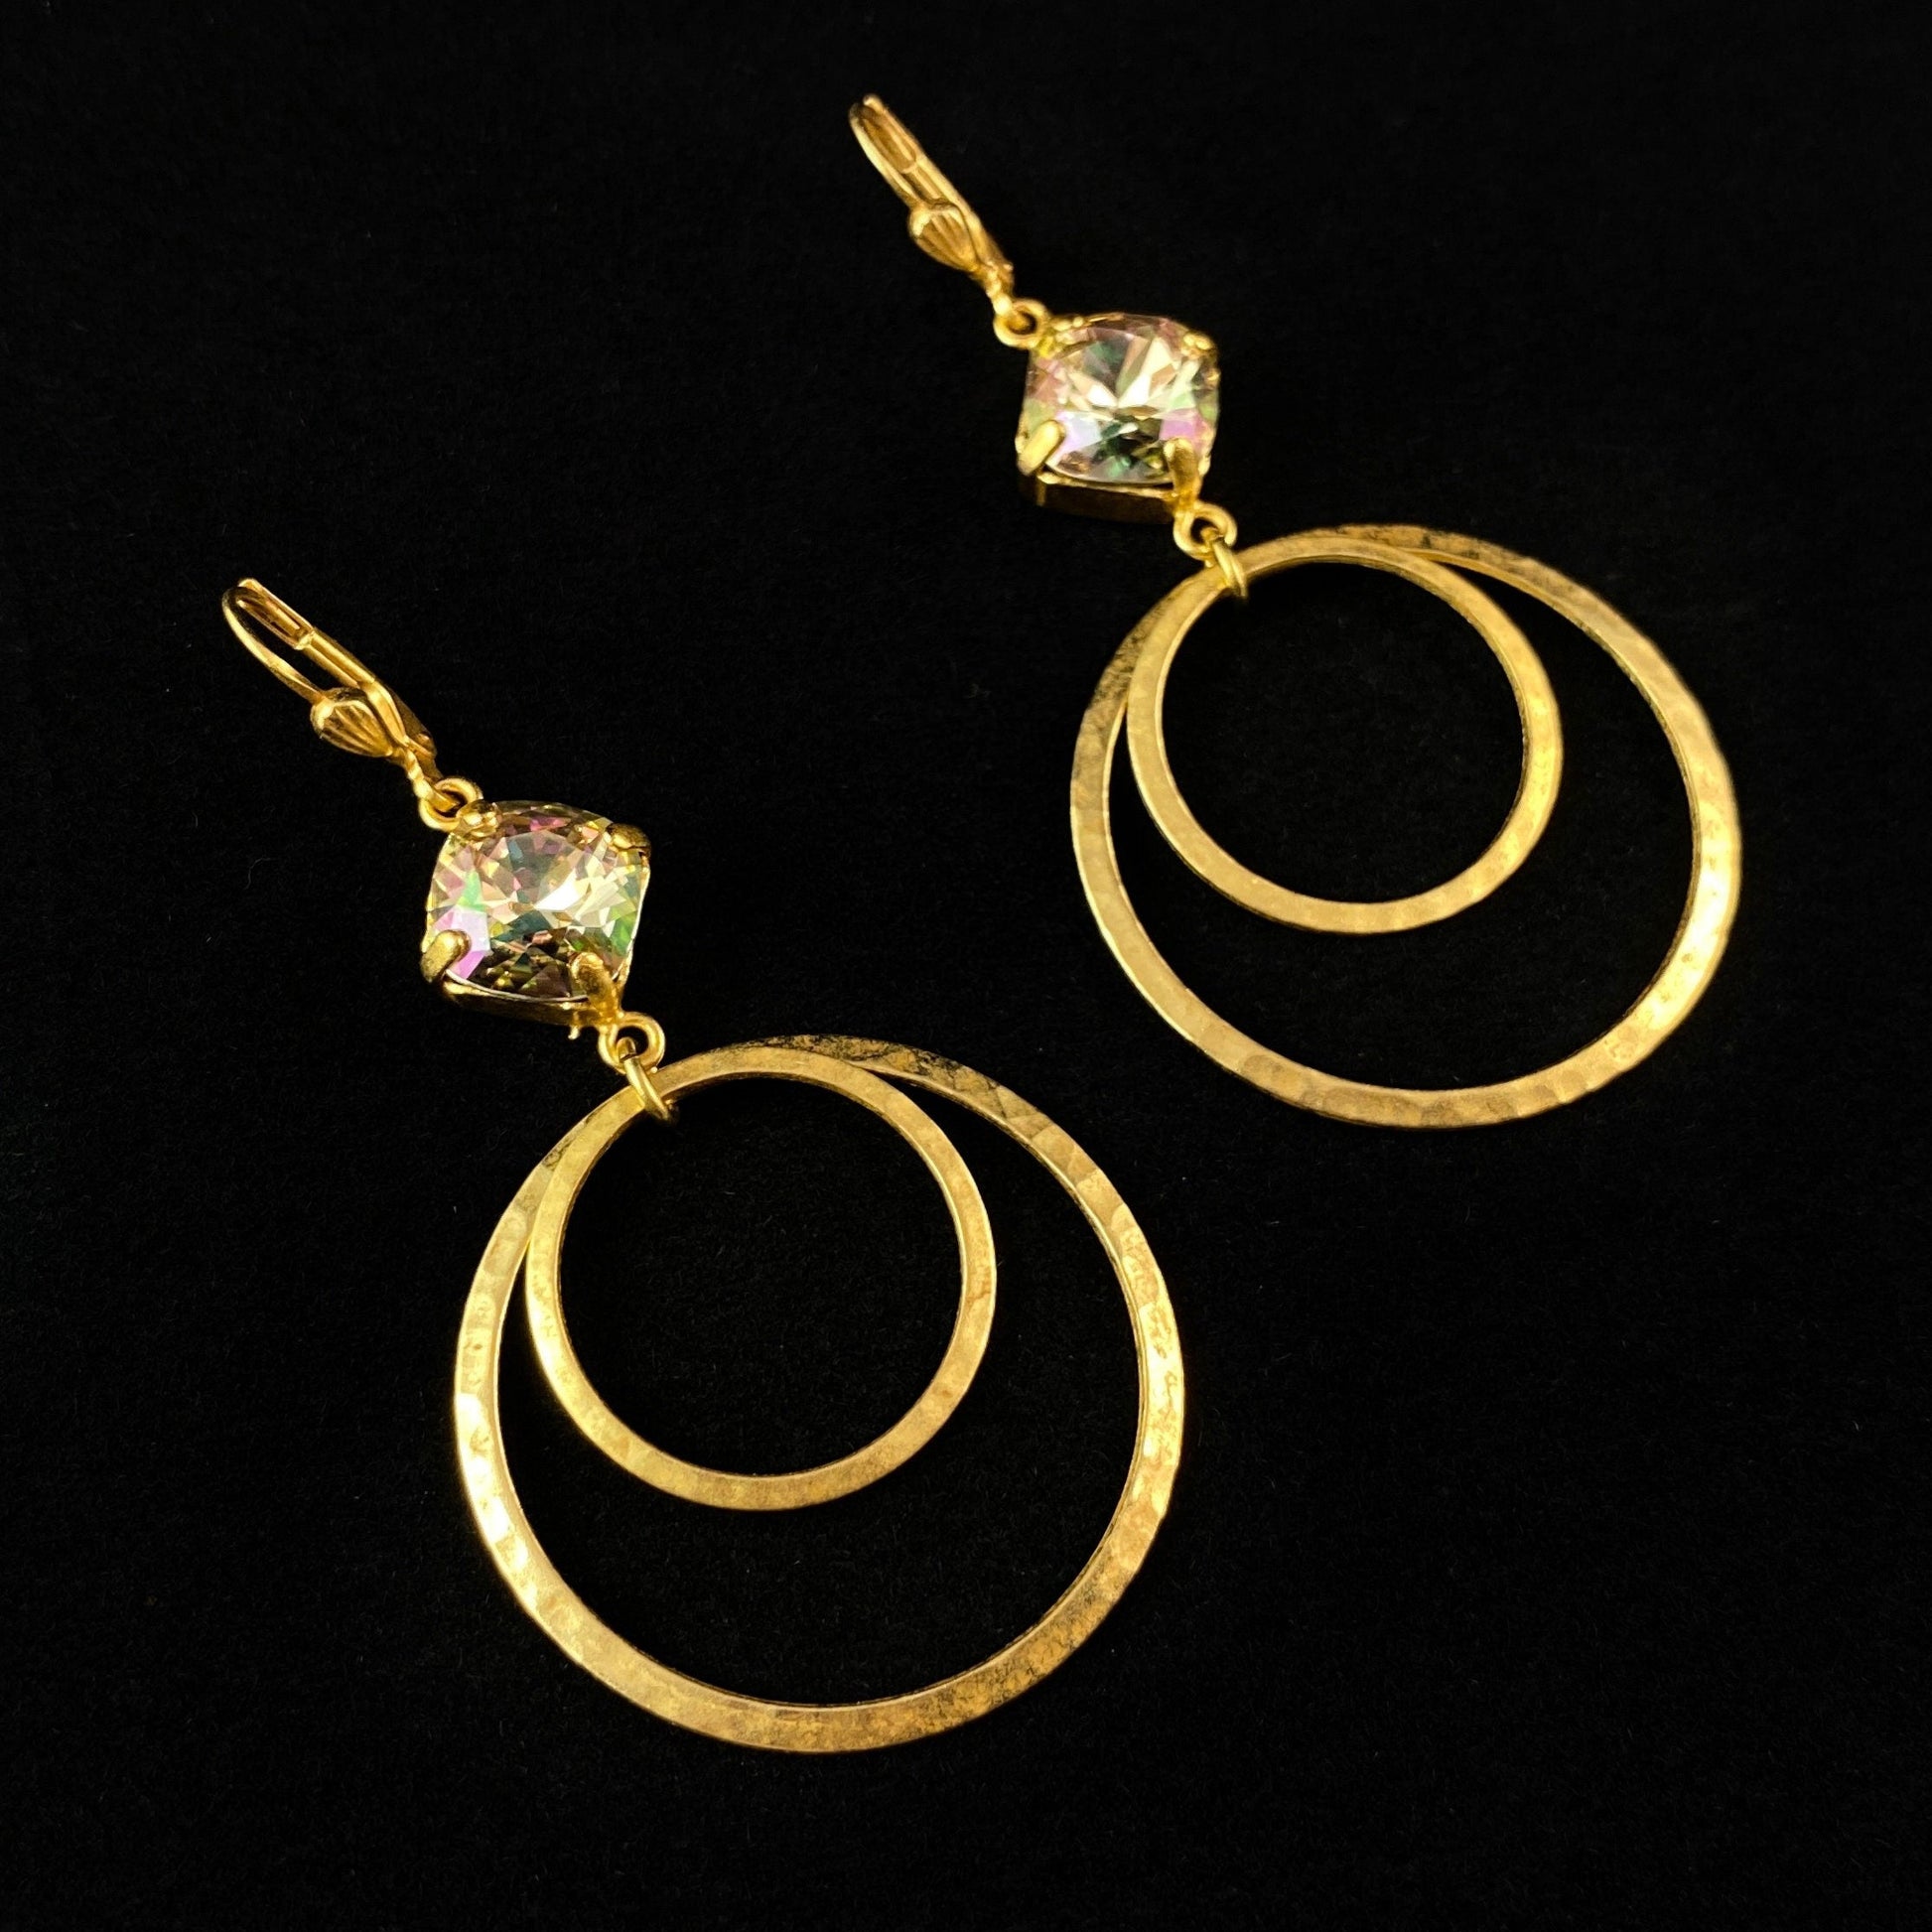 Double Gold Hoop Earrings with White Triangle Swarovski Crystals - La Vie Parisienne by Catherine Popesco